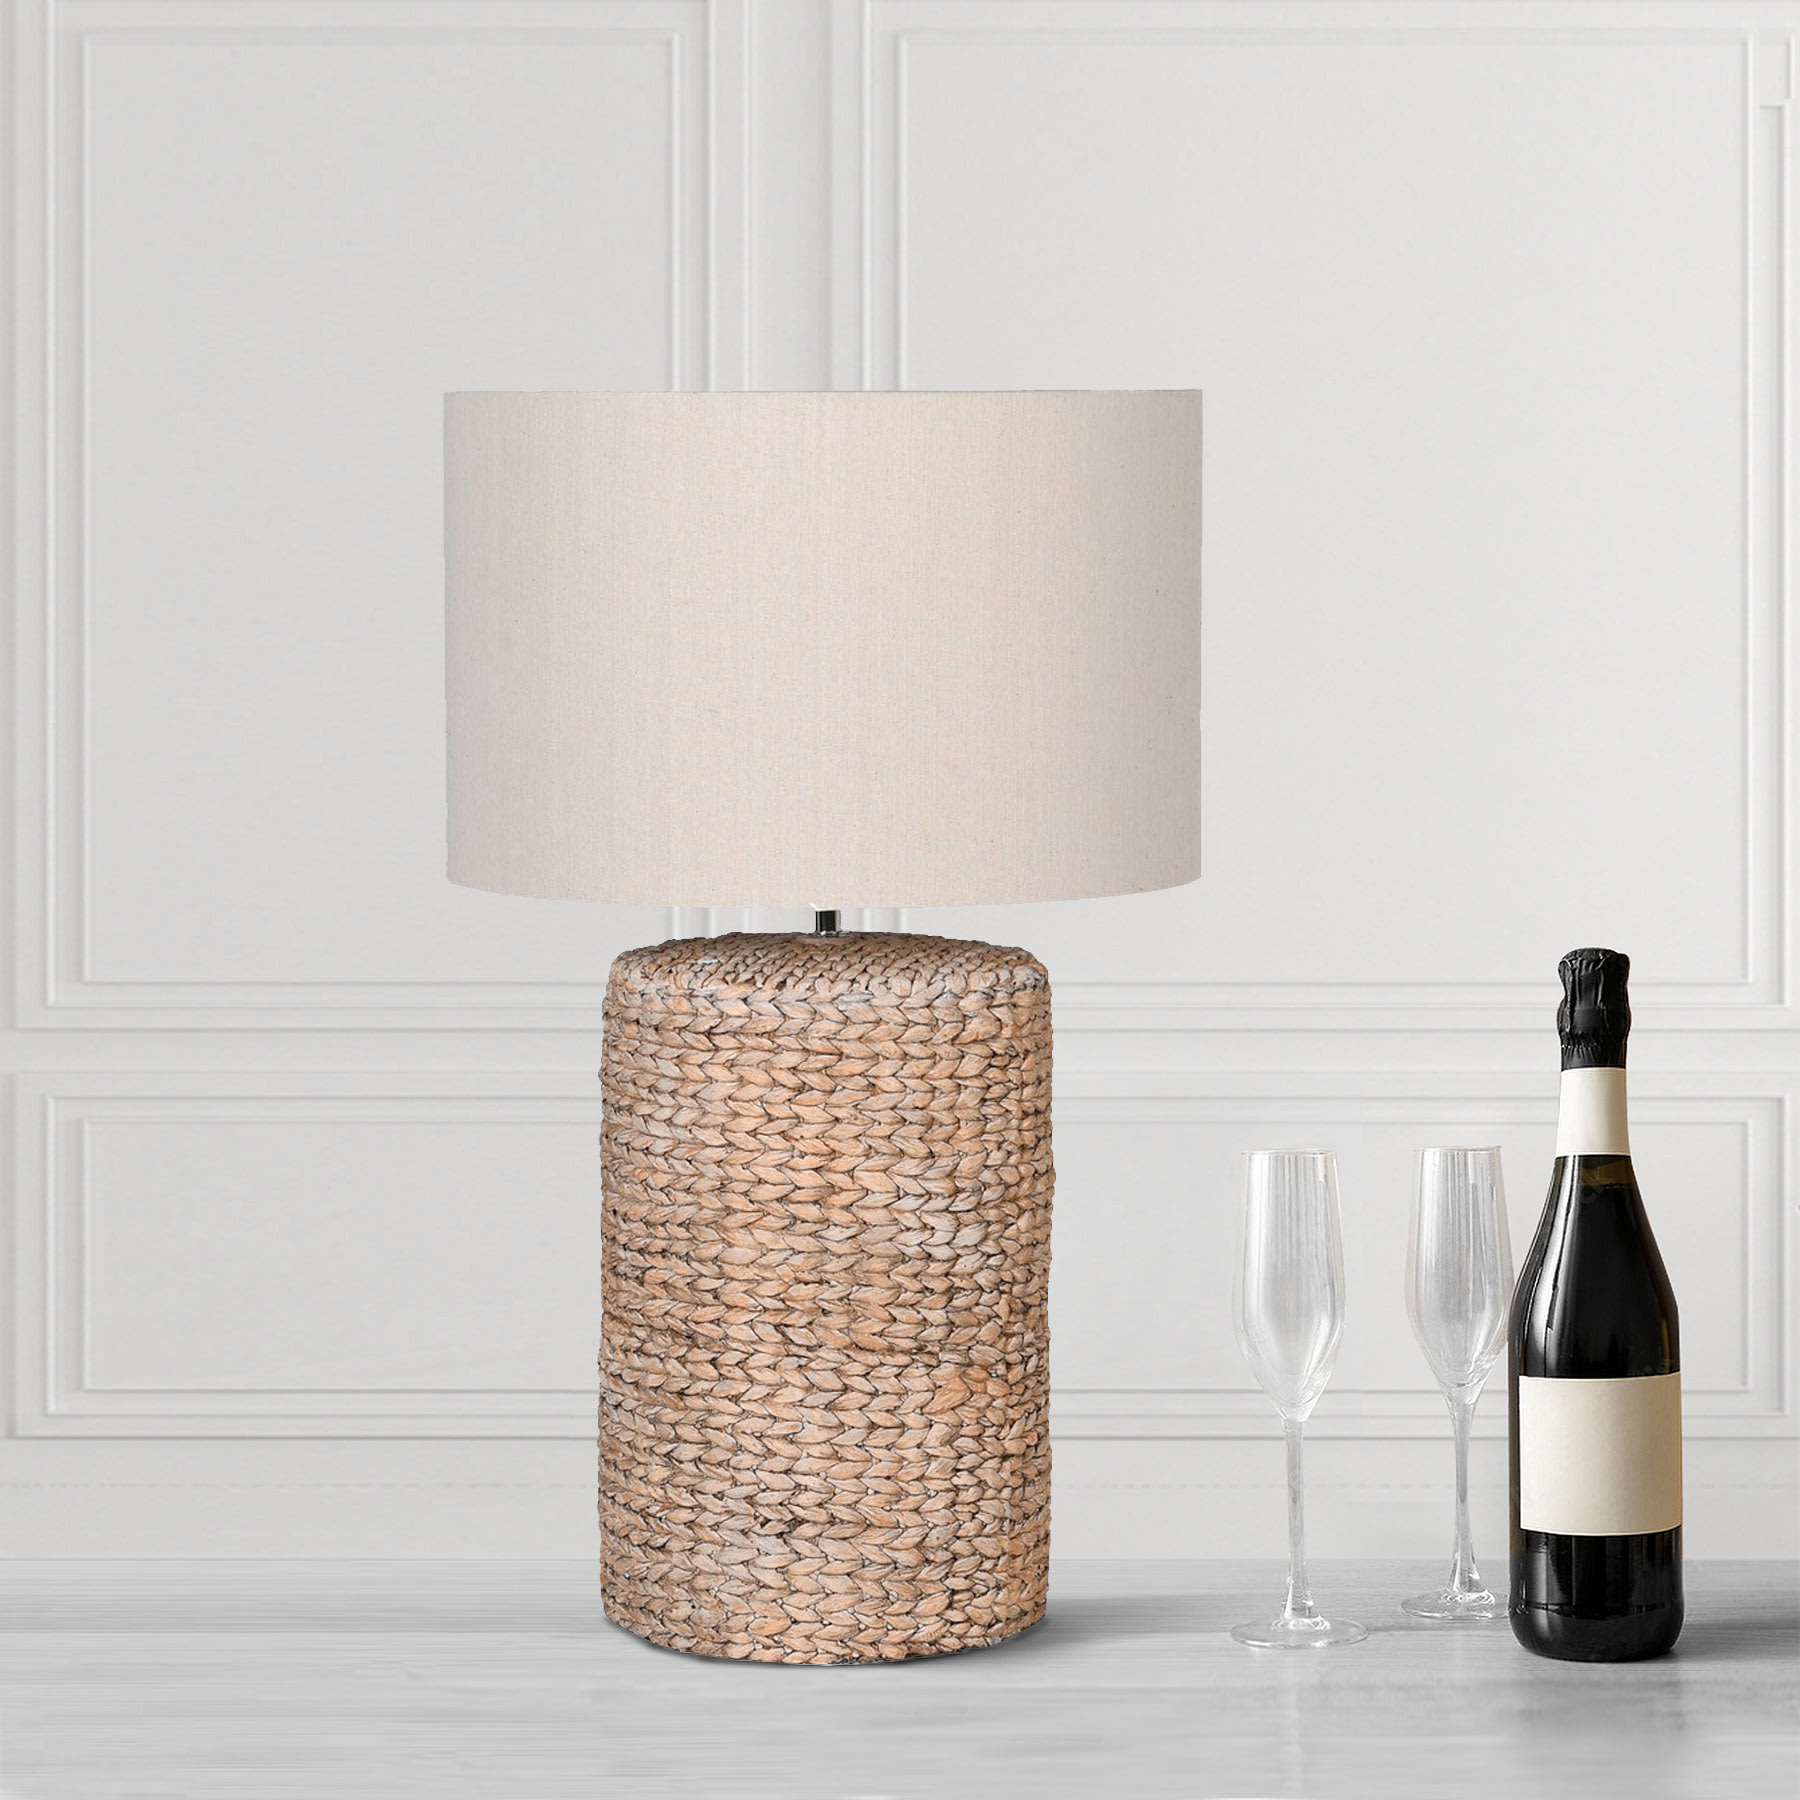 Rope Effect Table Lamp with Linen Shade